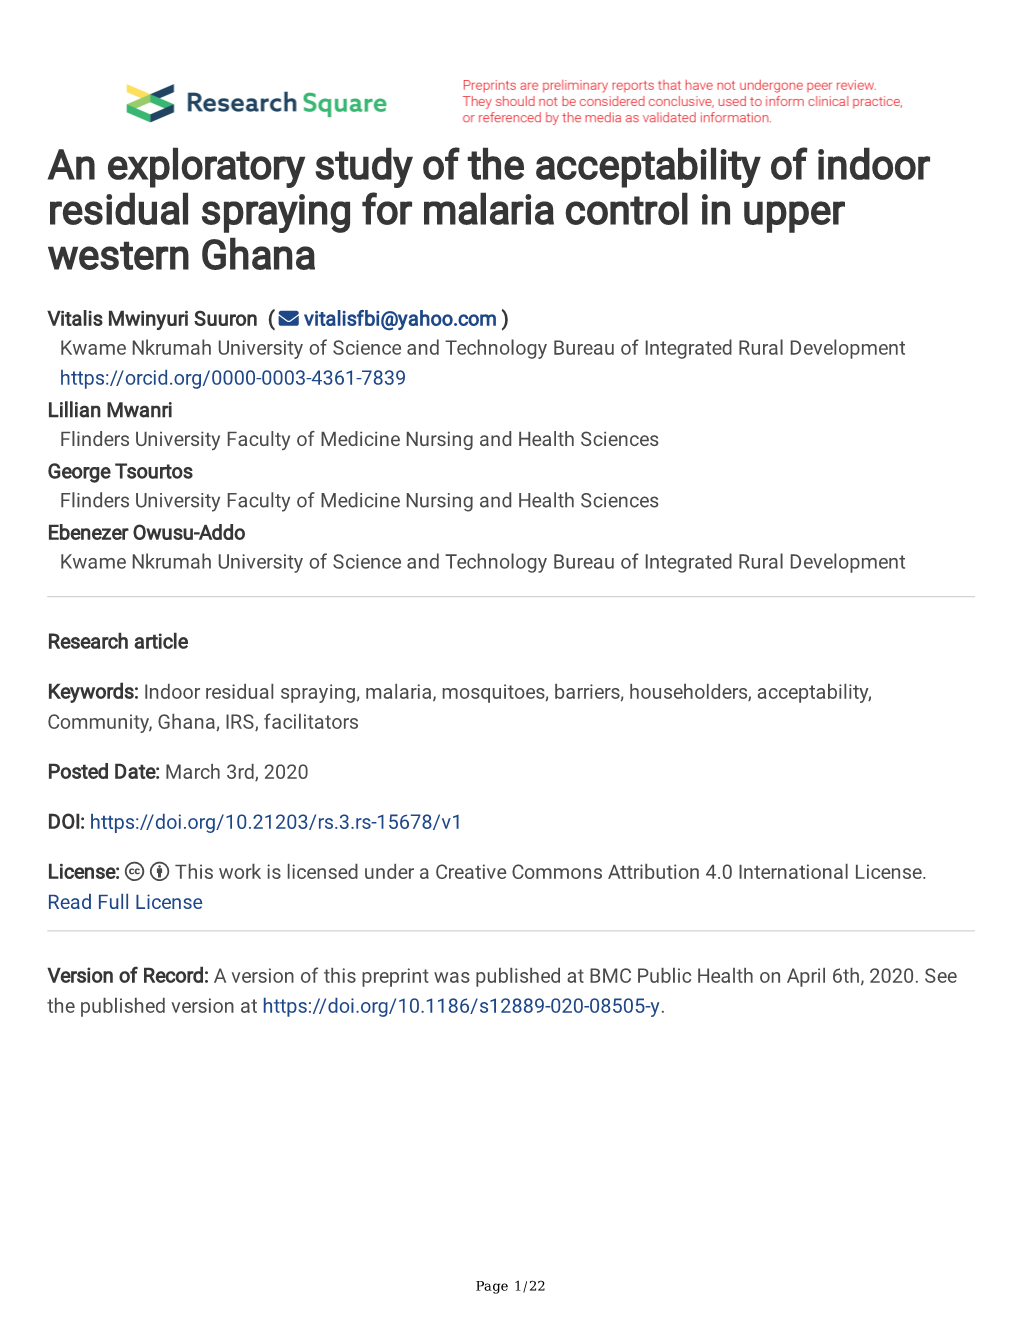 An Exploratory Study of the Acceptability of Indoor Residual Spraying for Malaria Control in Upper Western Ghana